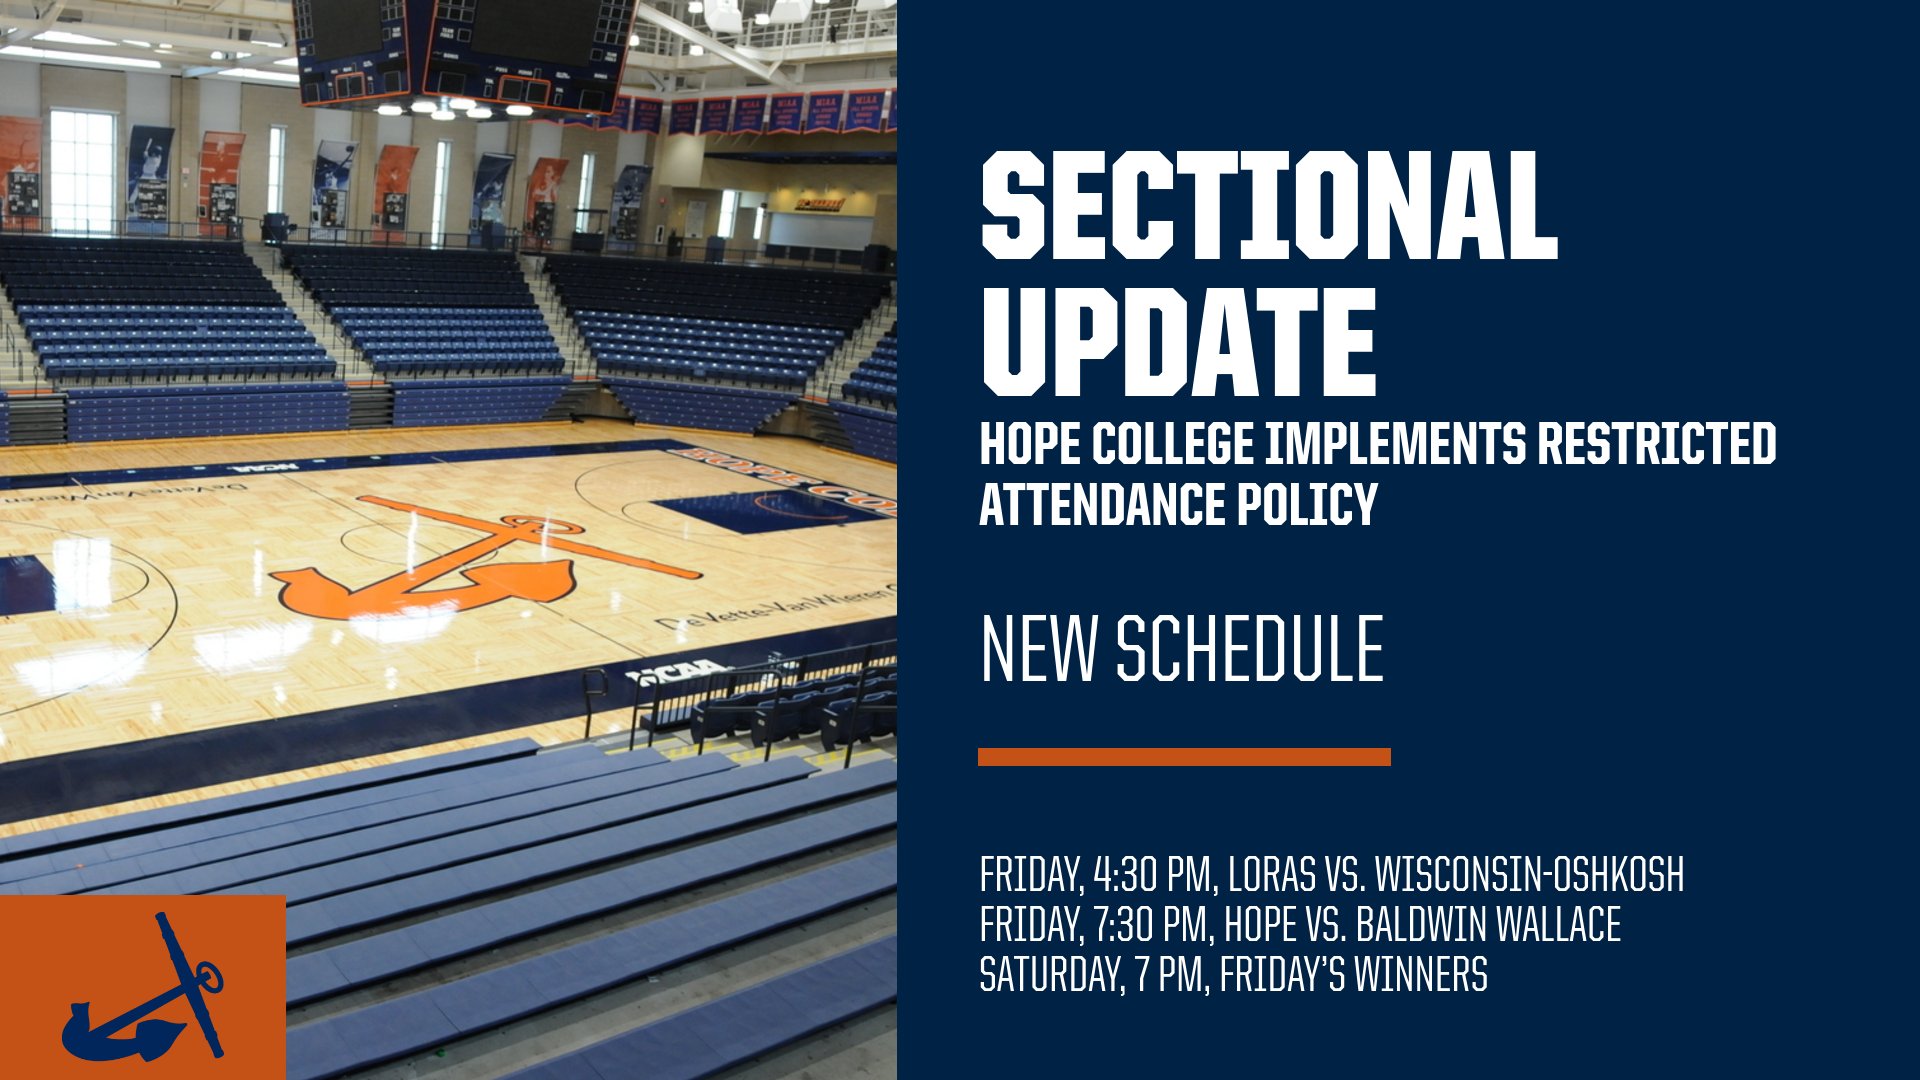 Restricted Attendance Policy Put In Place For NCAA Hope College Basketball Sectional